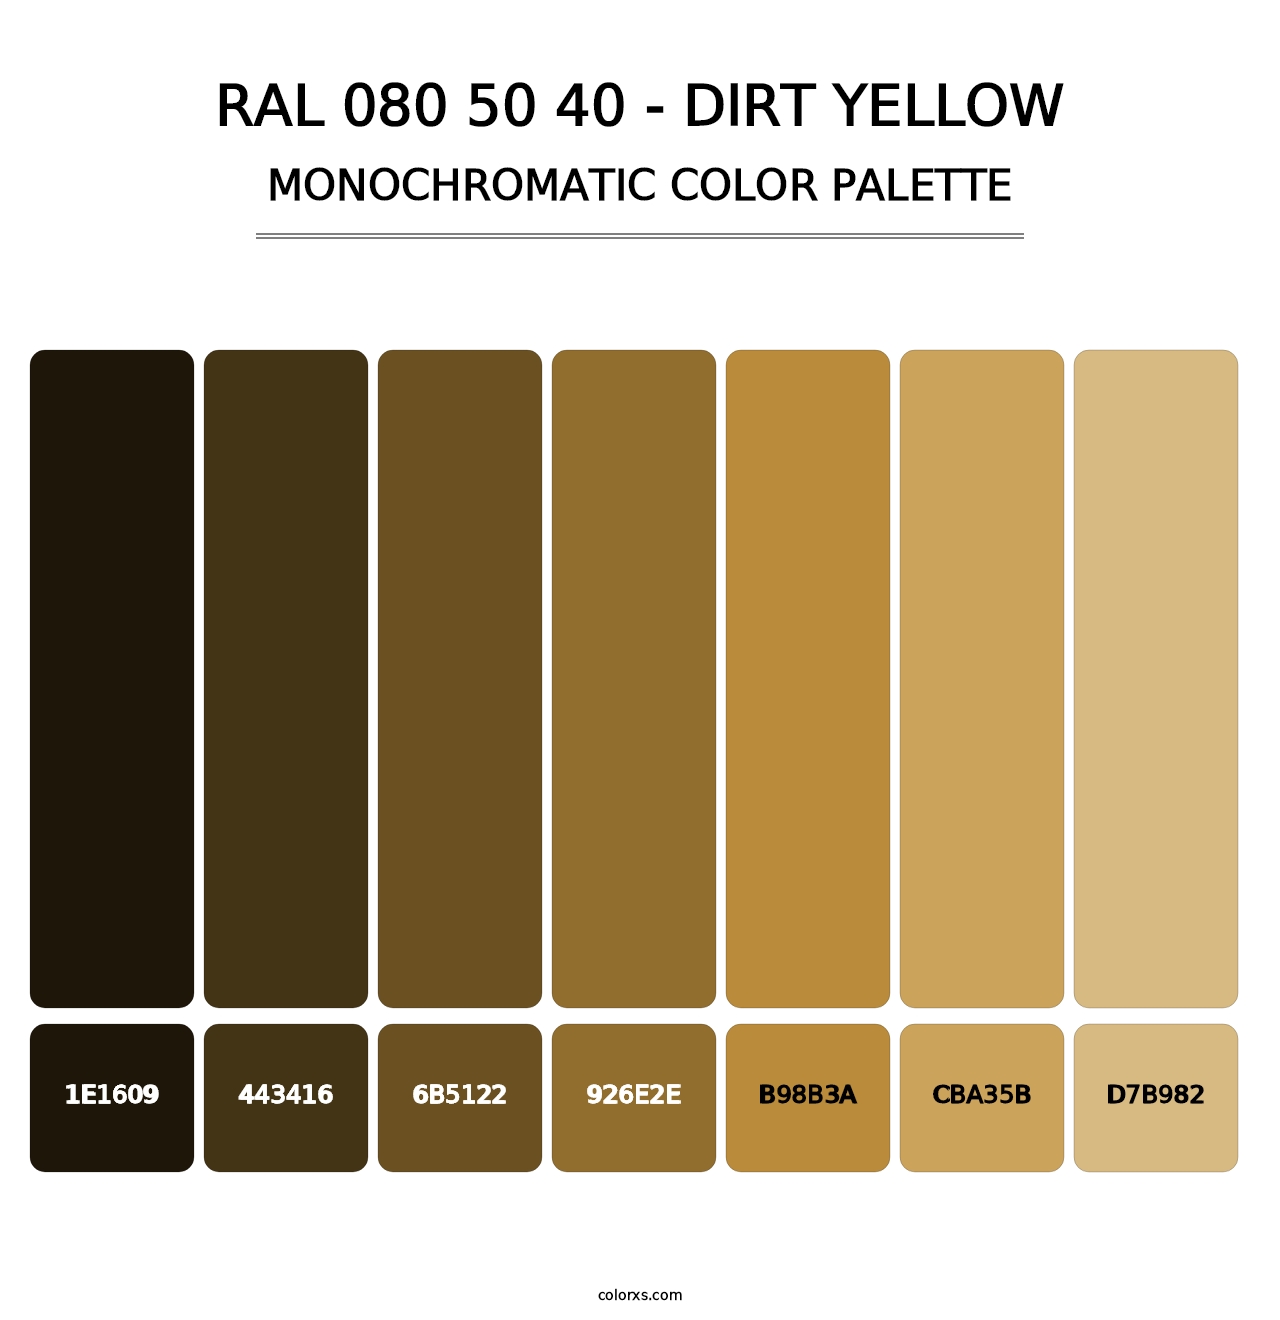 RAL 080 50 40 - Dirt Yellow - Monochromatic Color Palette